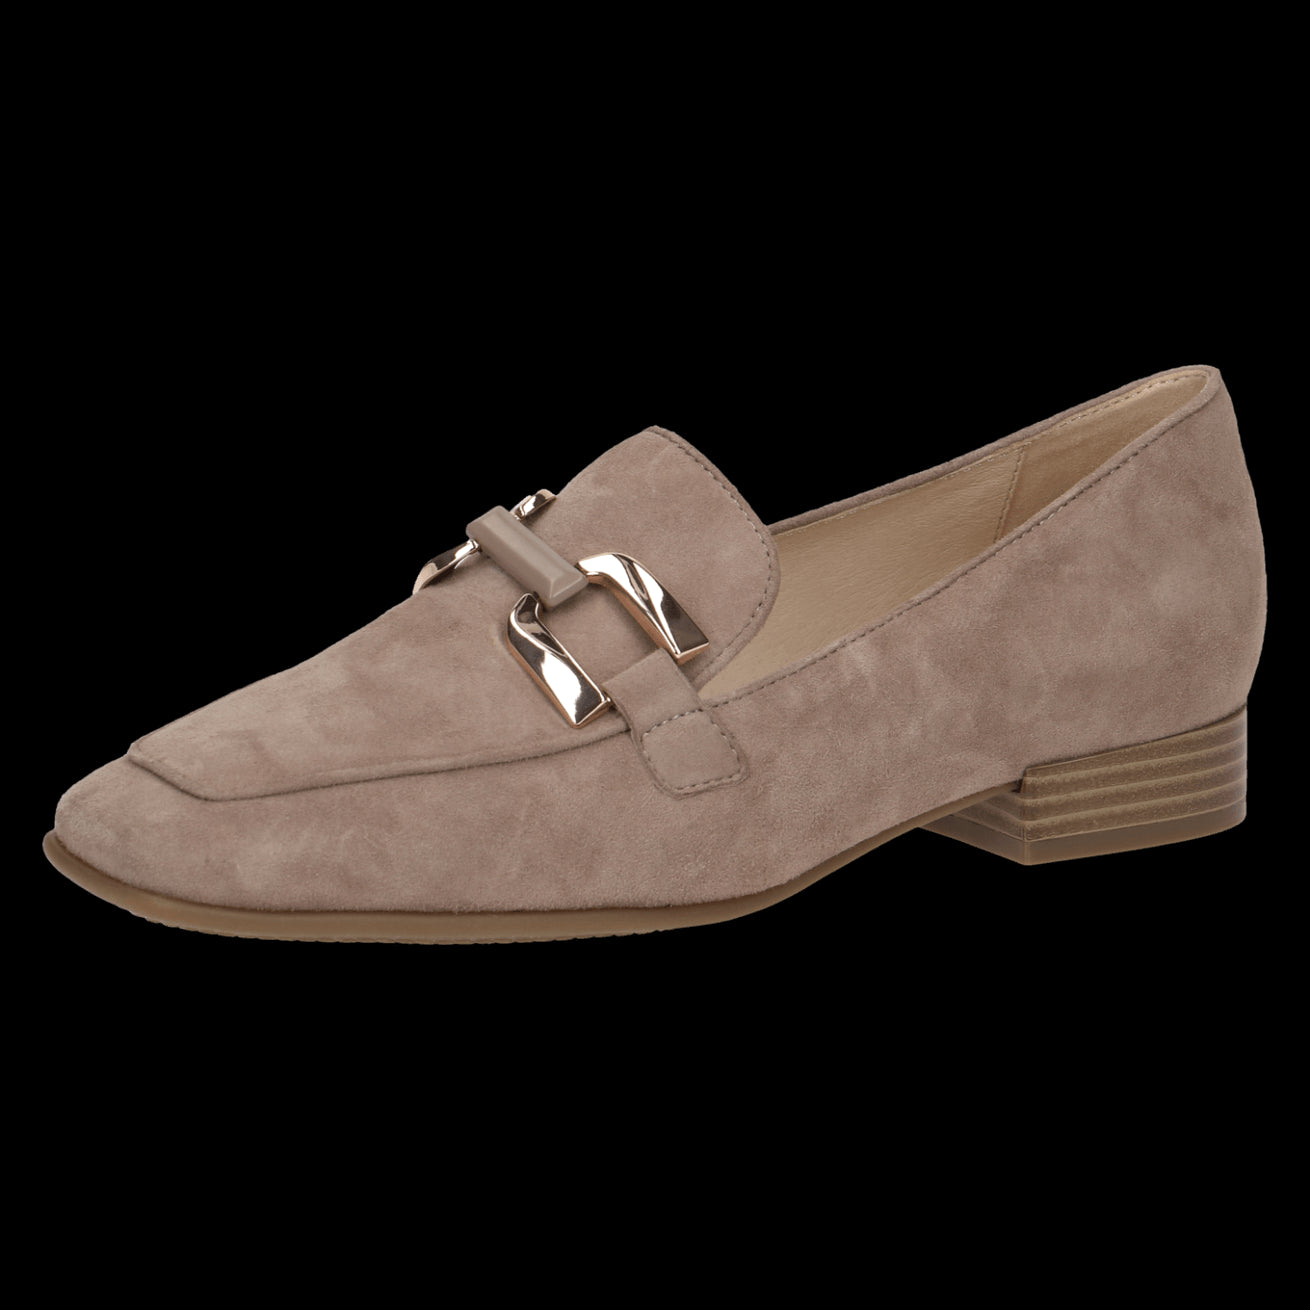 Alison | Taupe - Caprice - Jenny Shoo Bootique